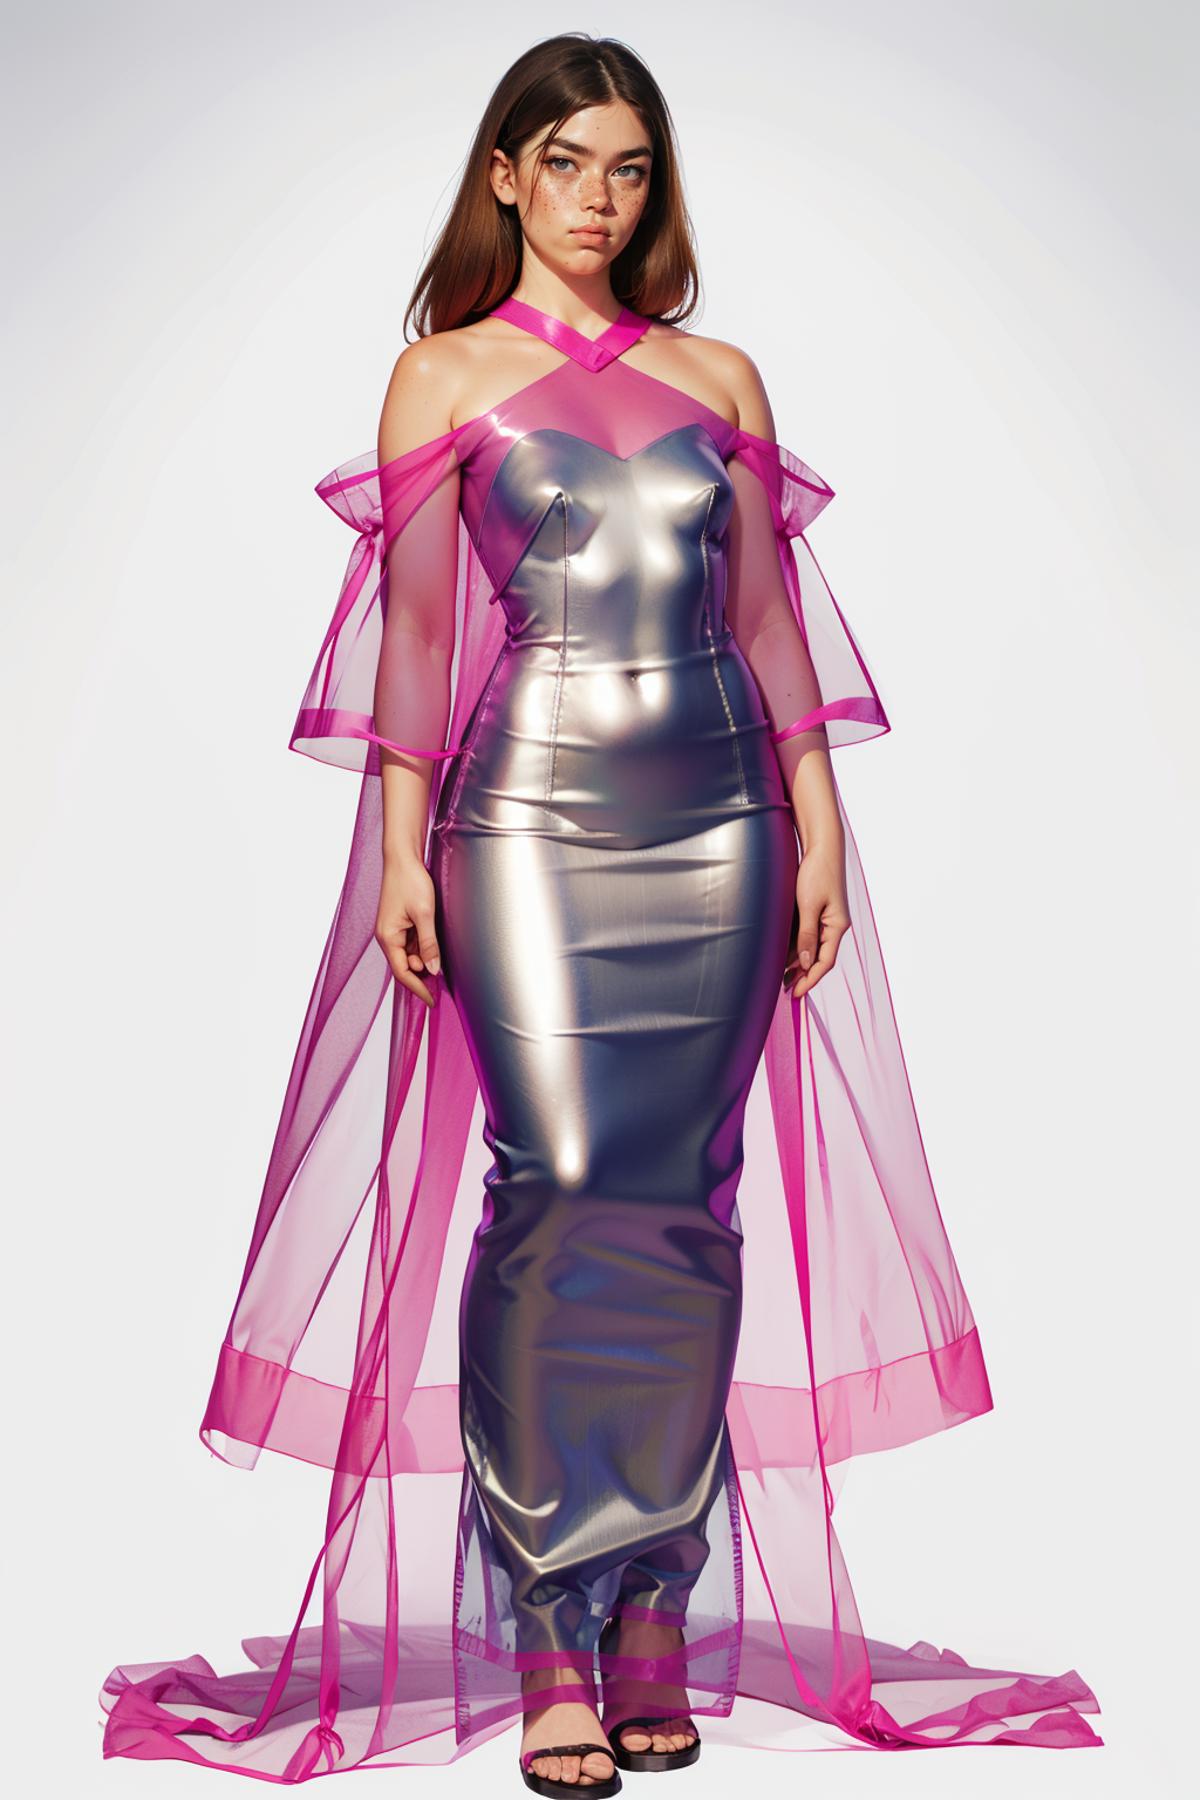 Pink Sheer Silver Dress image by freckledvixon